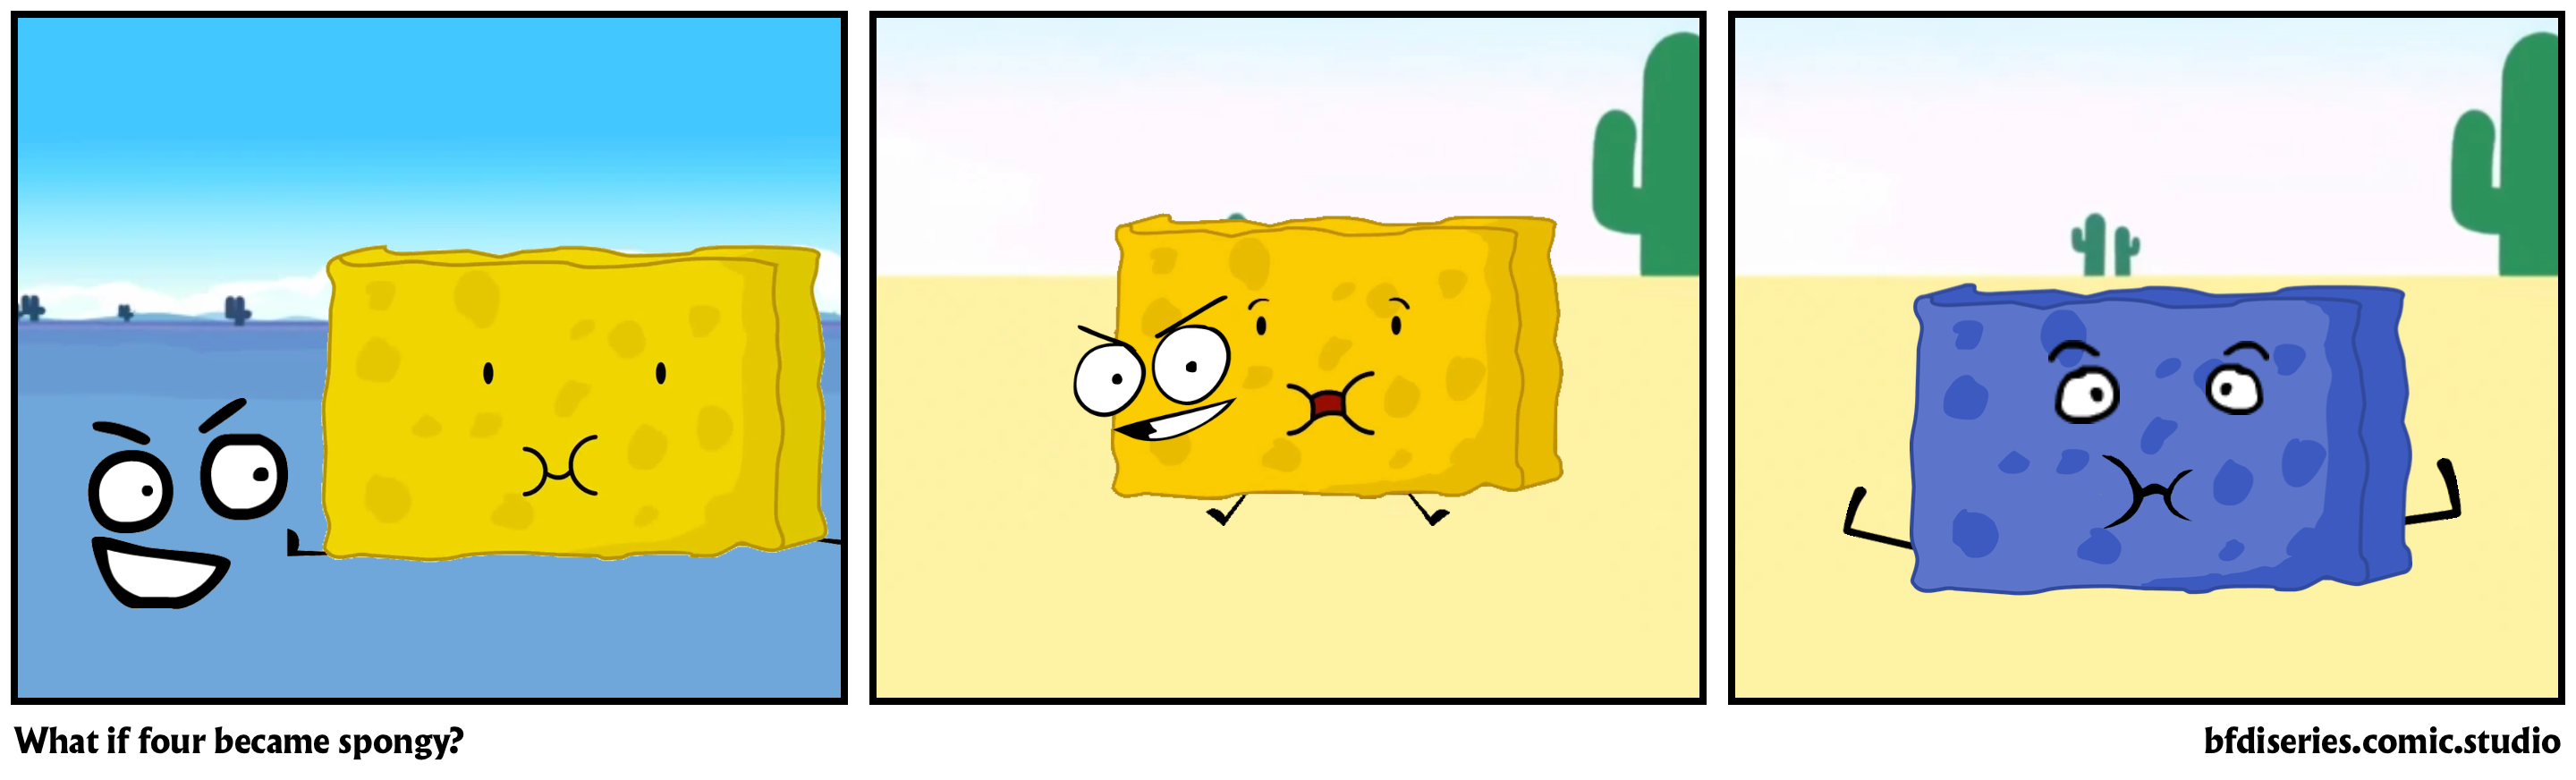 What if four became spongy?